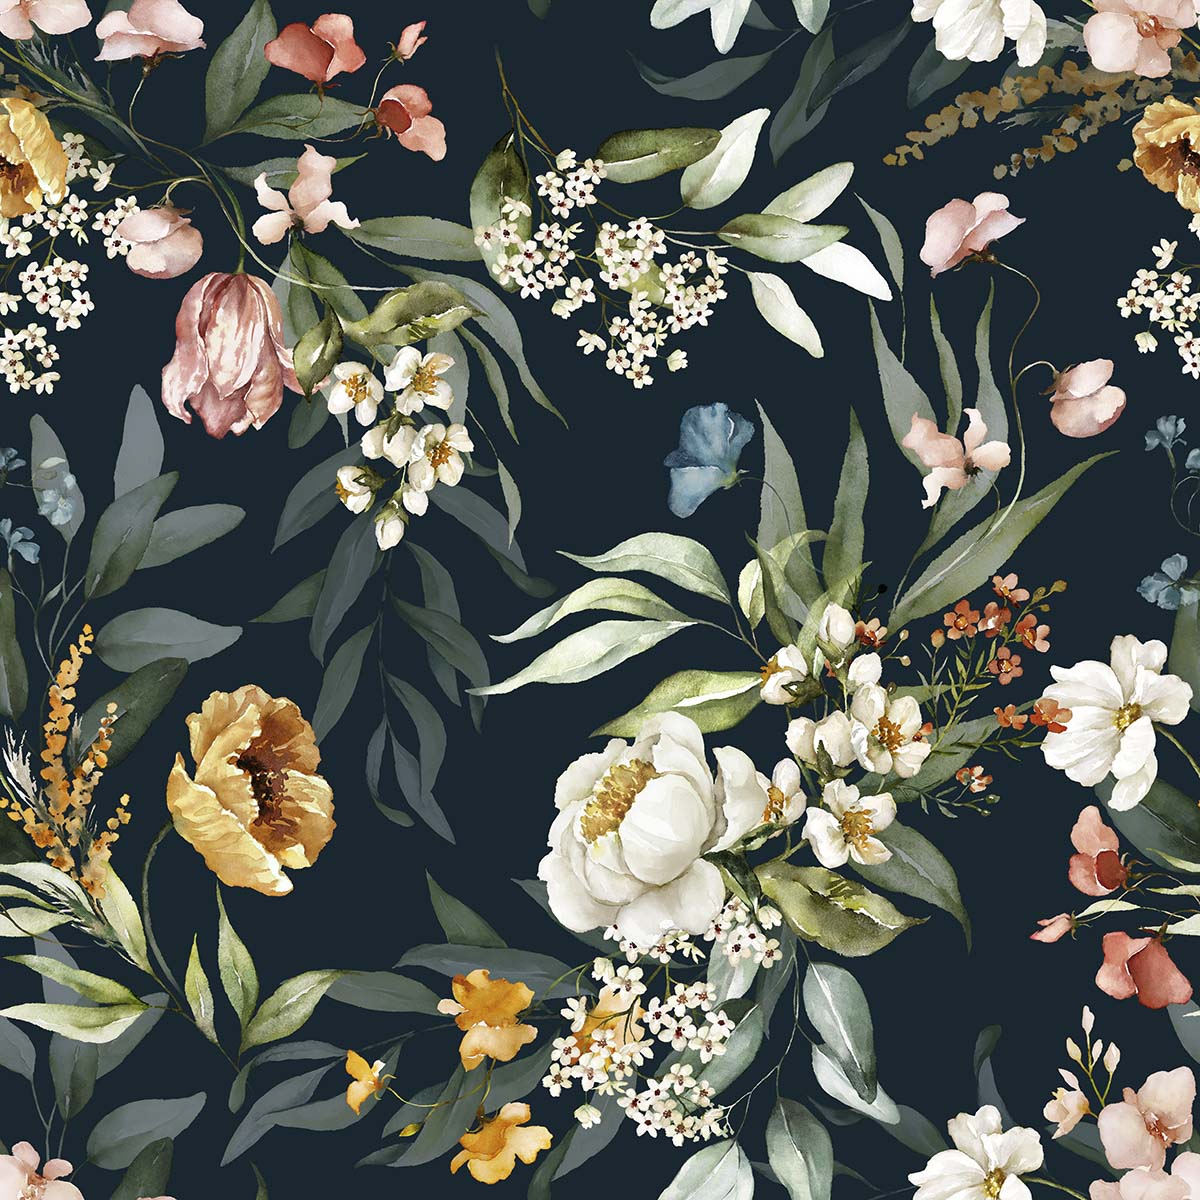 A floral pattern with leaves and flowers